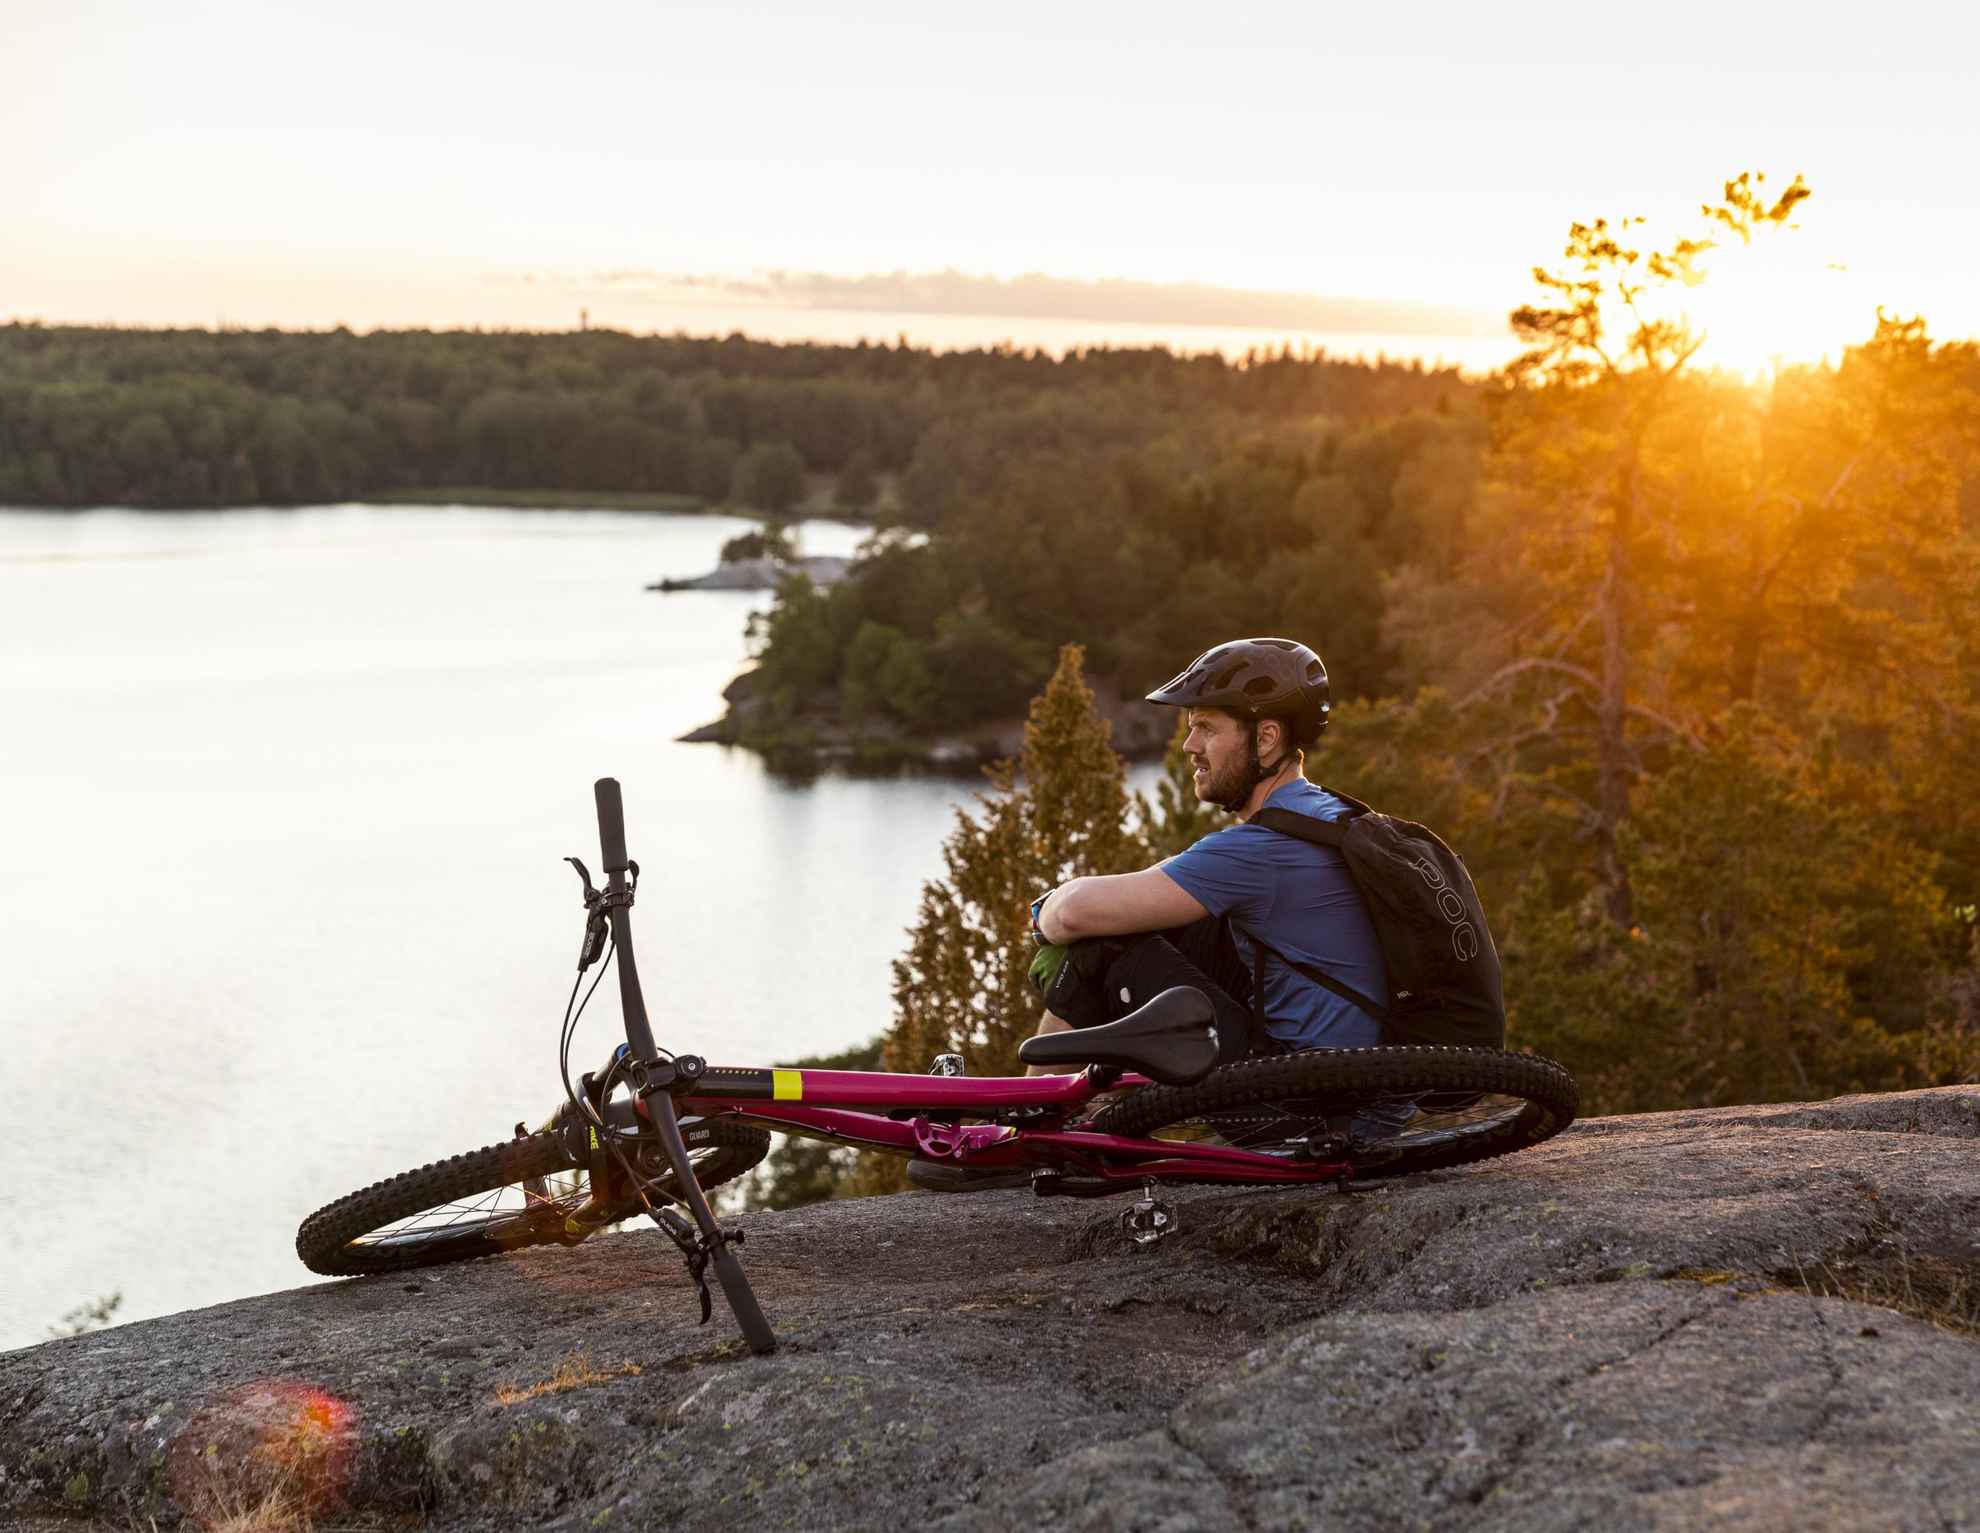 A man is relaxing on a cliff with his bike lying next to him. The man is overlooking a lake.